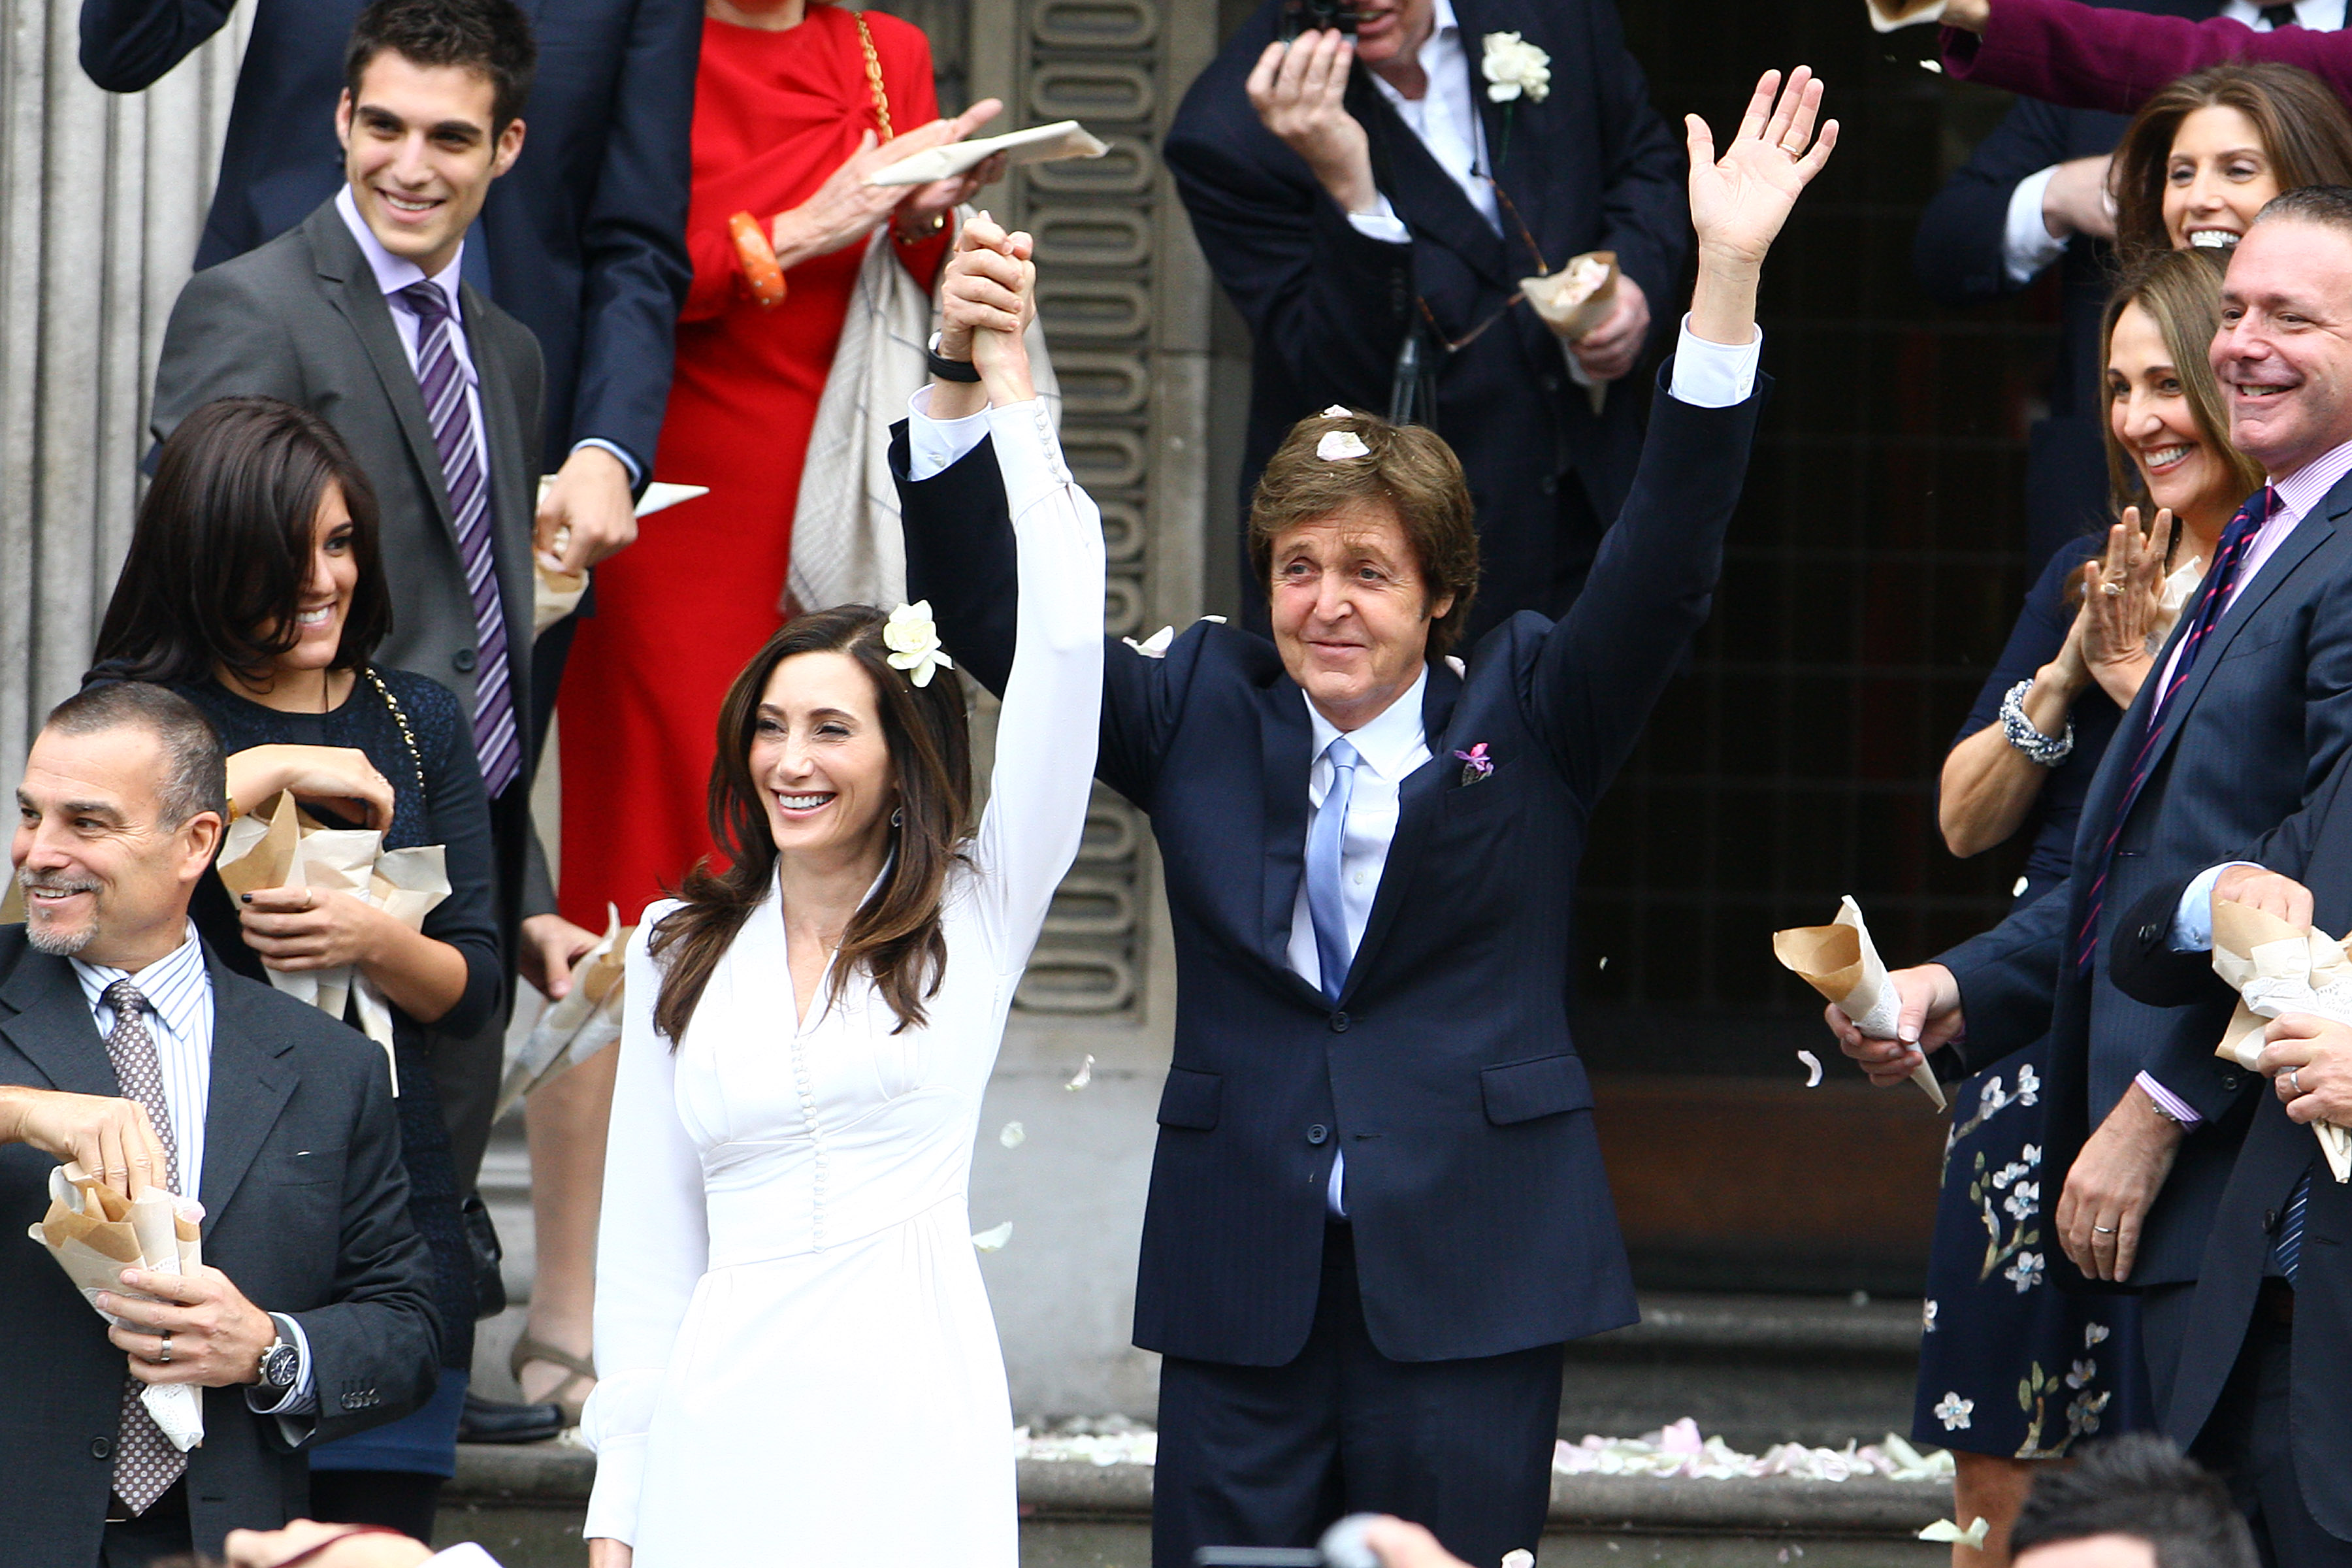 Paul McCartney and Nancy Shevell leaving their wedding ceremony at Marylebone Registry Office in October 2011. | Source: Getty Images